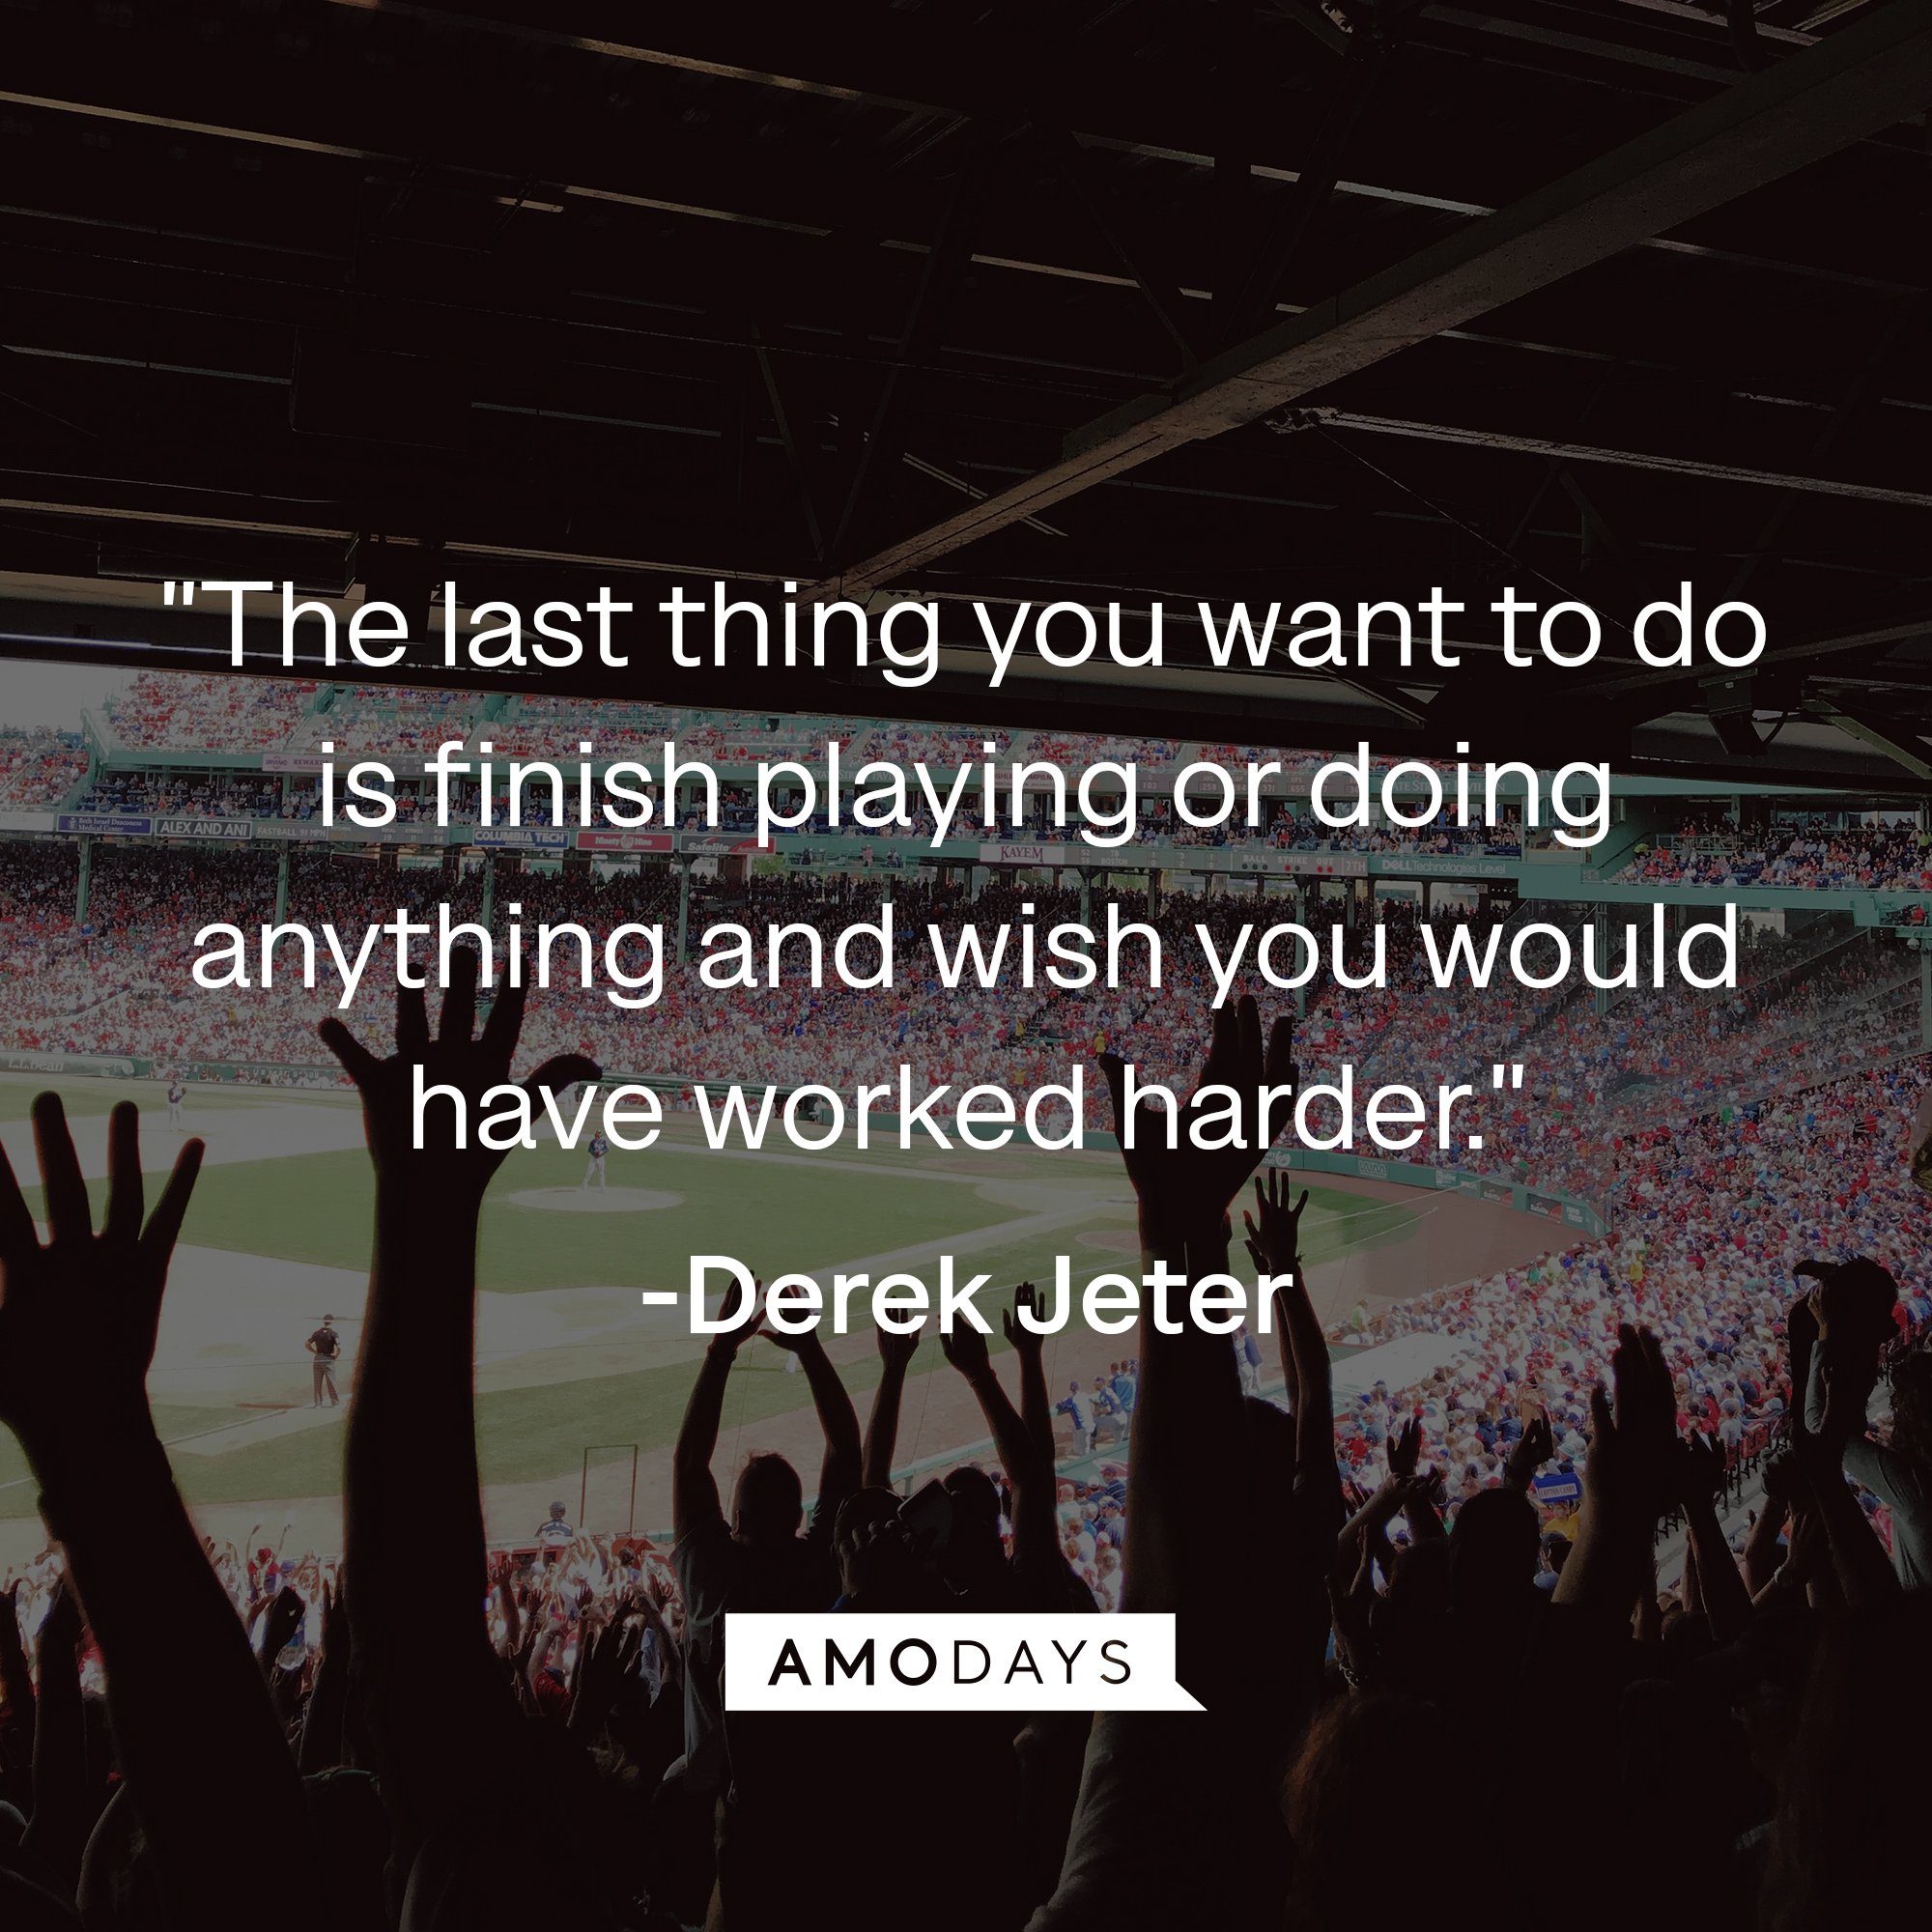 Derek Jeter's quote: "The last thing you want to do is finish playing or doing anything and wish you would have worked harder." | Image: AmoDays